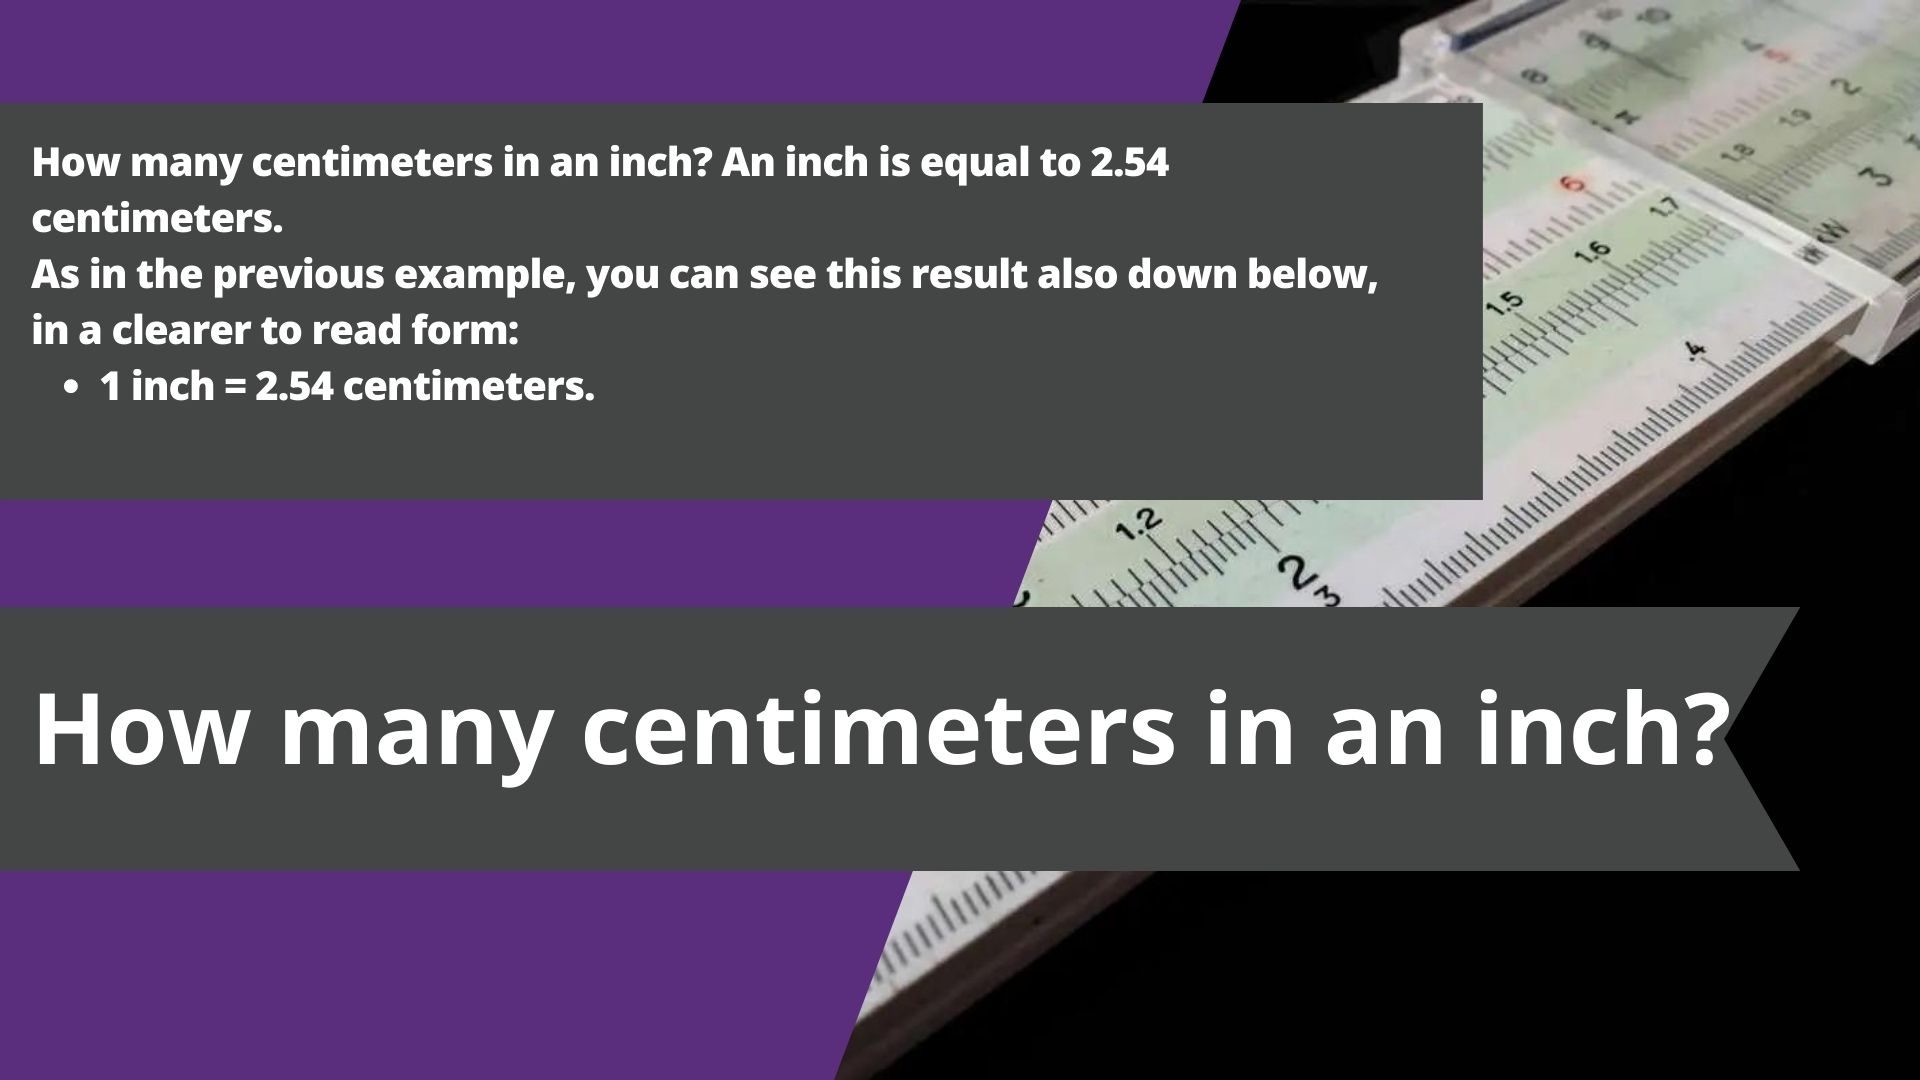 How many centimeters in an inch?